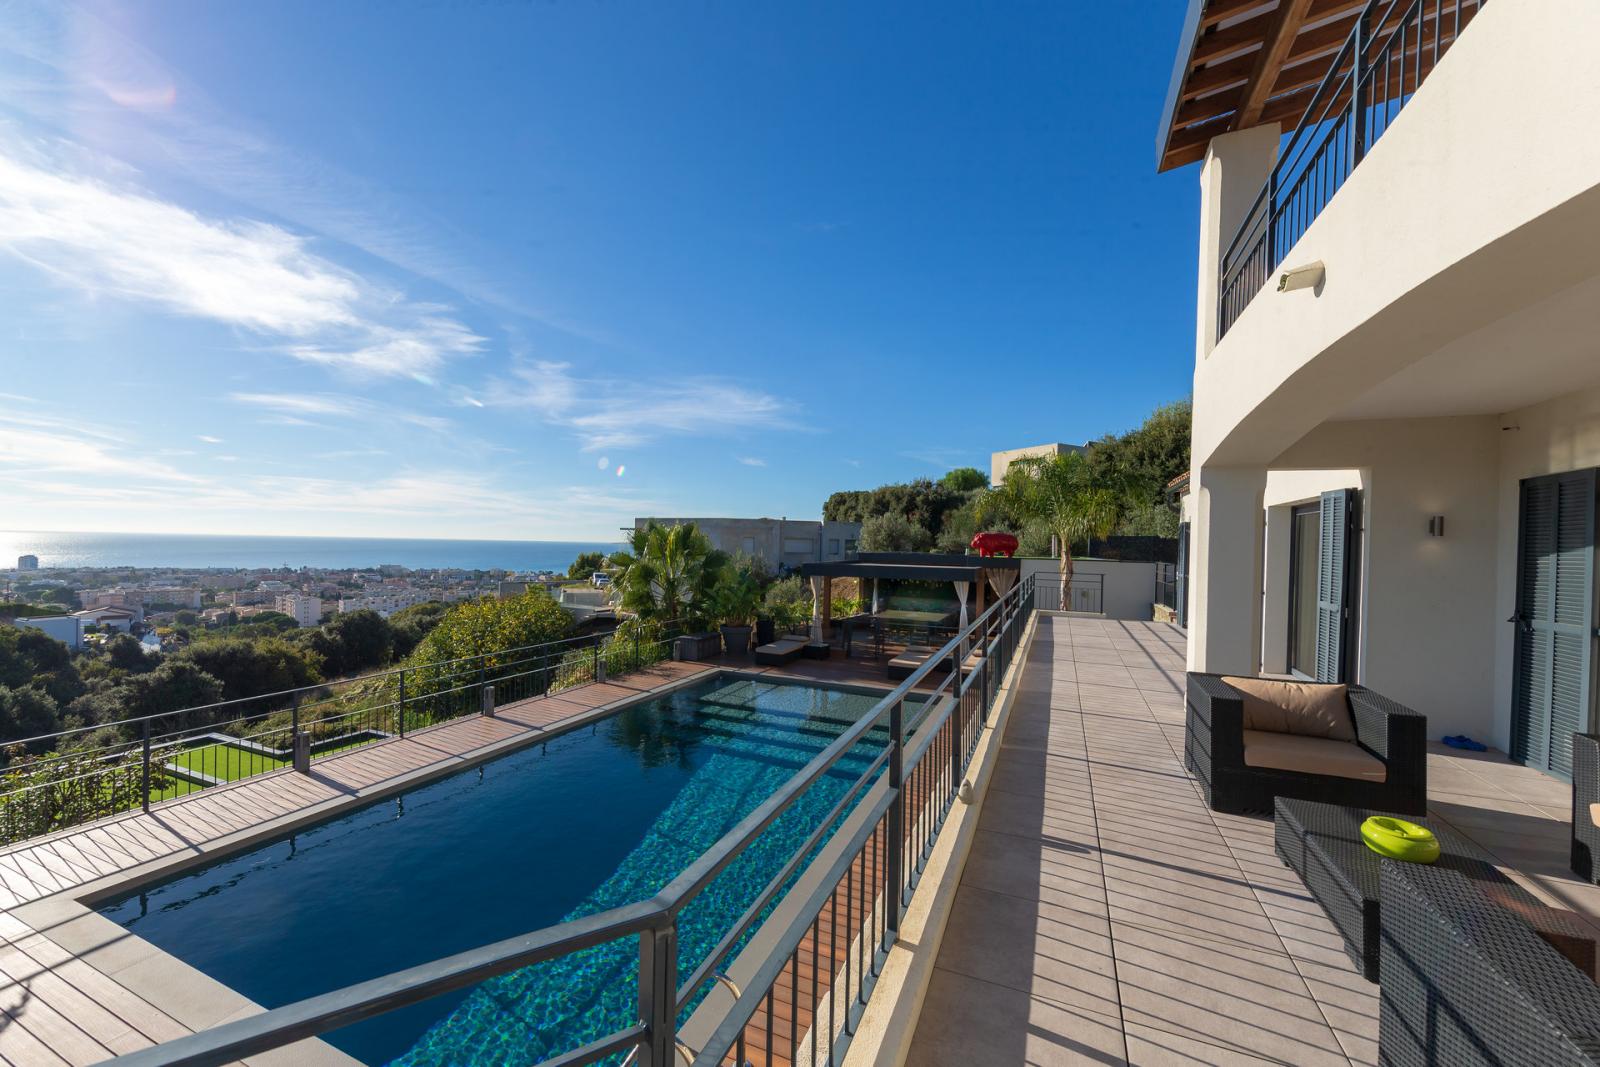 Luxury villa on the French Riviera: 15 minutes from Nice airport